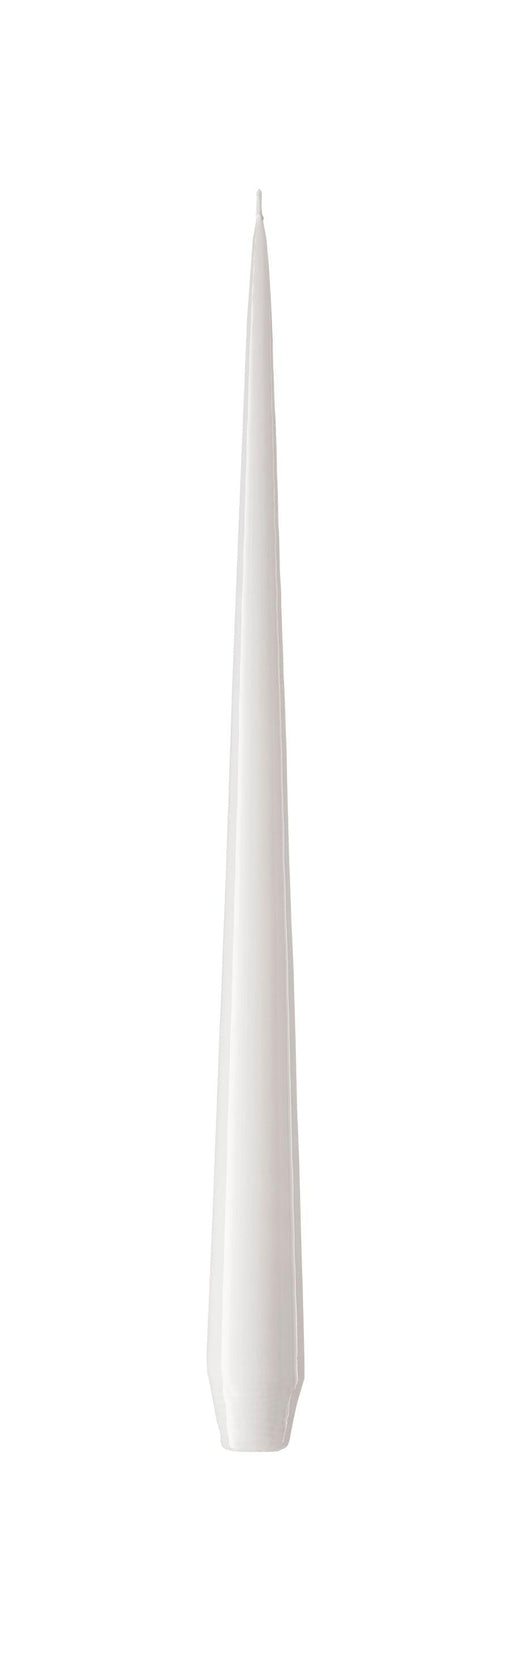 Taper candle lacquered 42cm white ash (set of 12) Ester & Erik - -. FOODIES IN HEELS